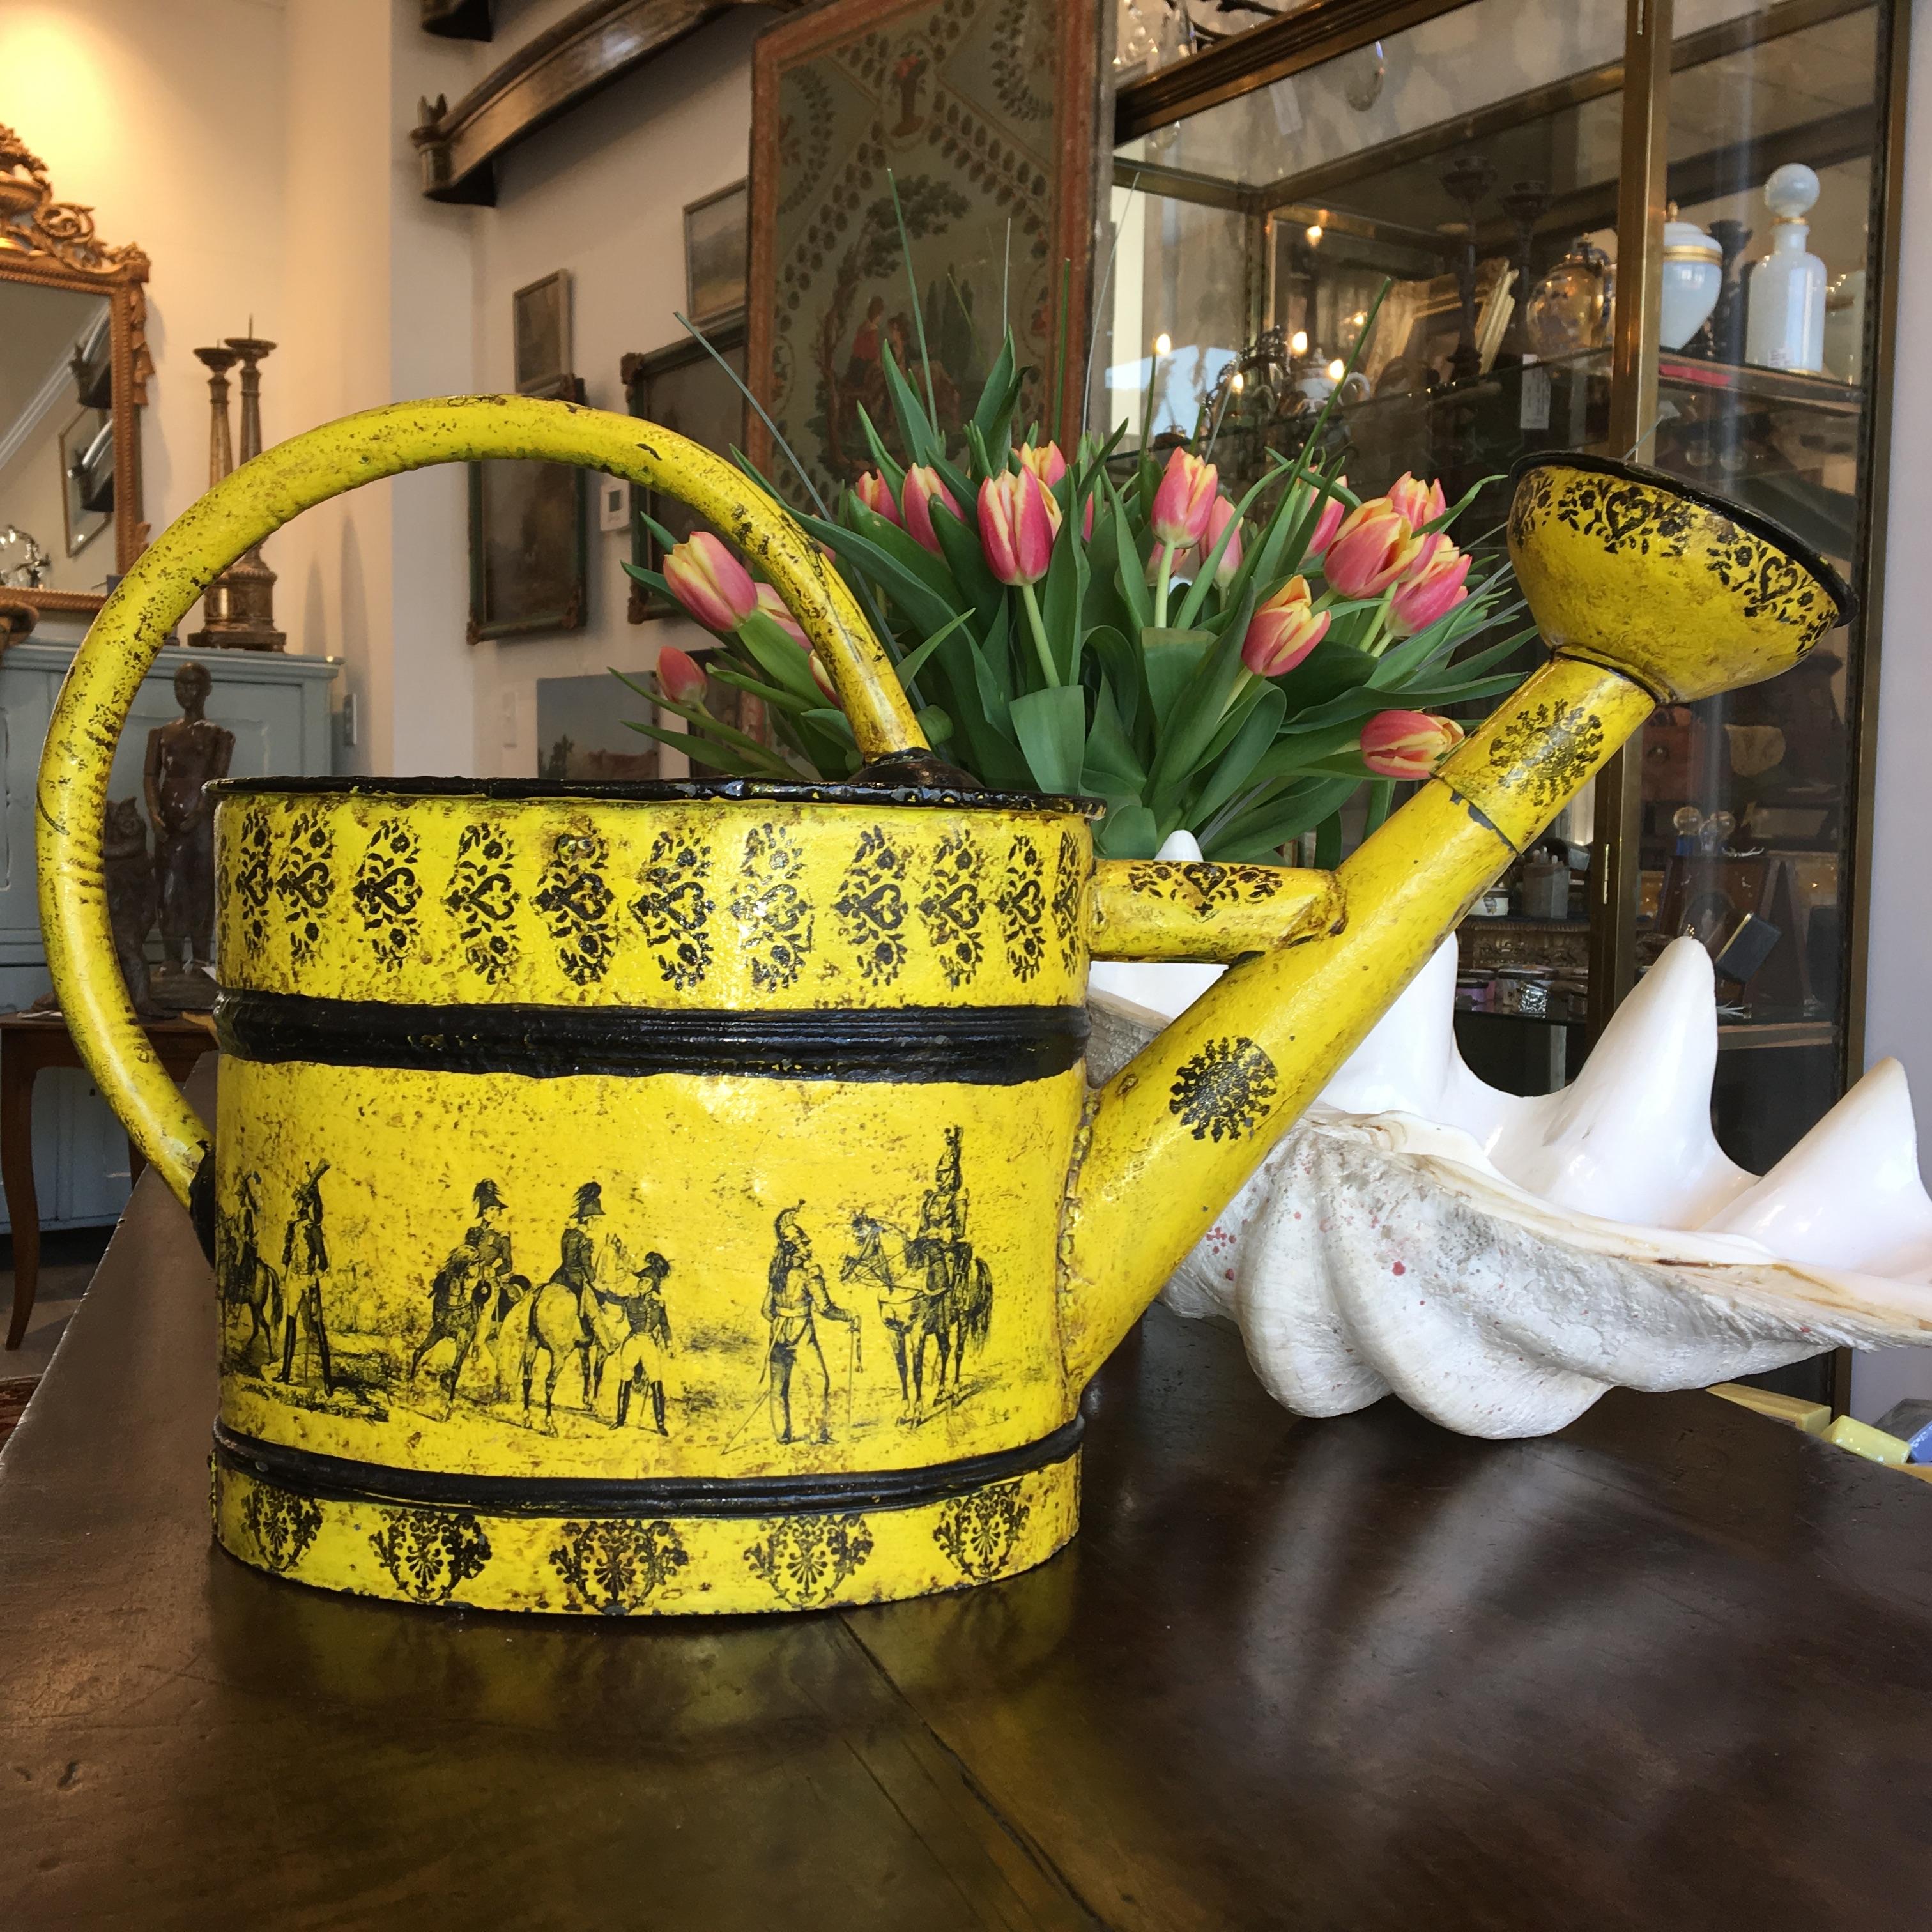 Large Napoleon III tole watering can in vibrant yellow and black, found in Provence. A stunning French Provincial piece.